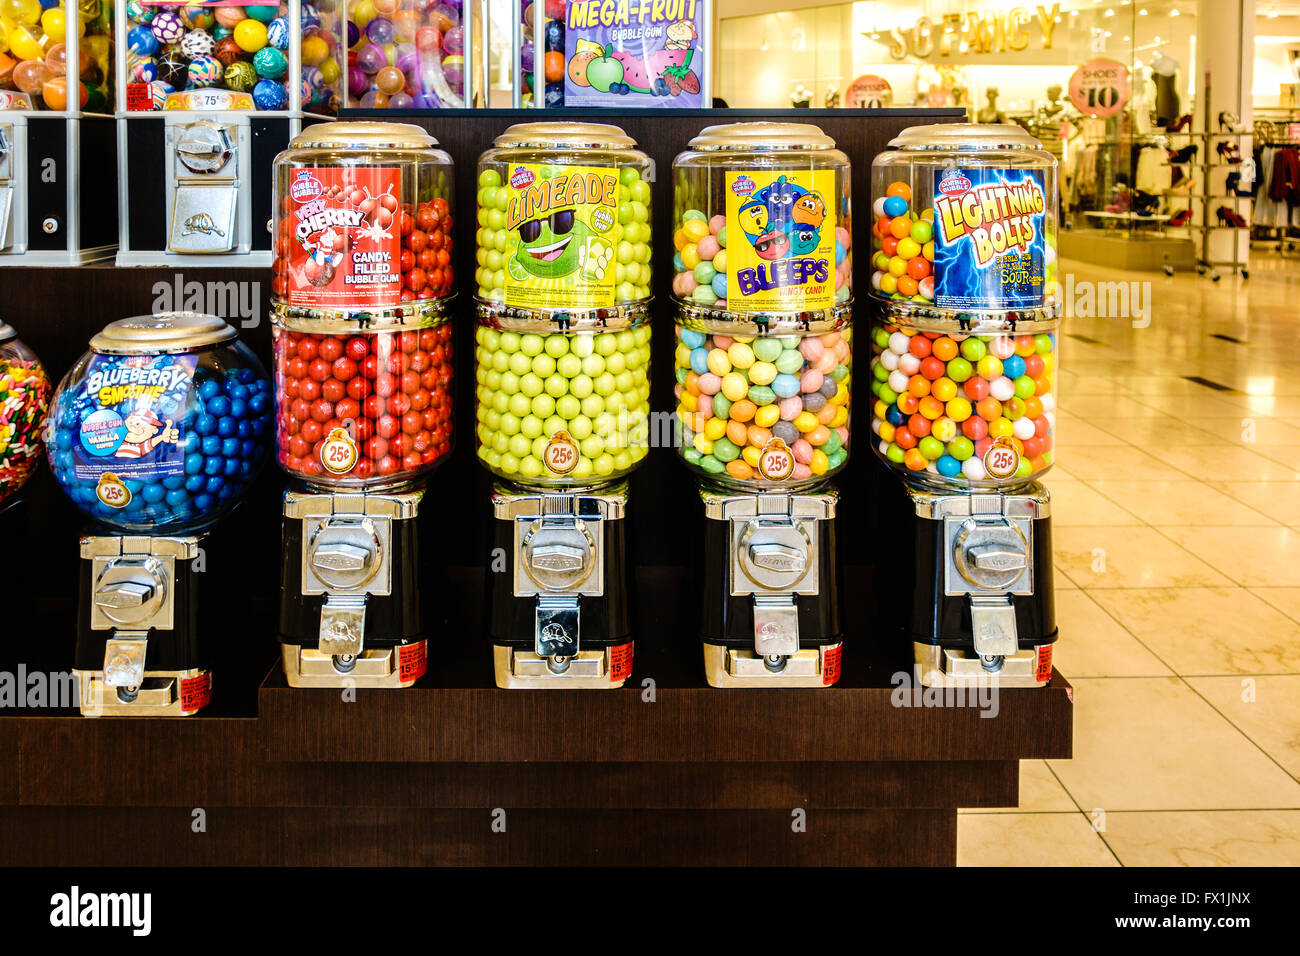 Round candies and bubblegum in coin operated dispensers in a shopping mall. Oklahoma, USA. Stock Photo